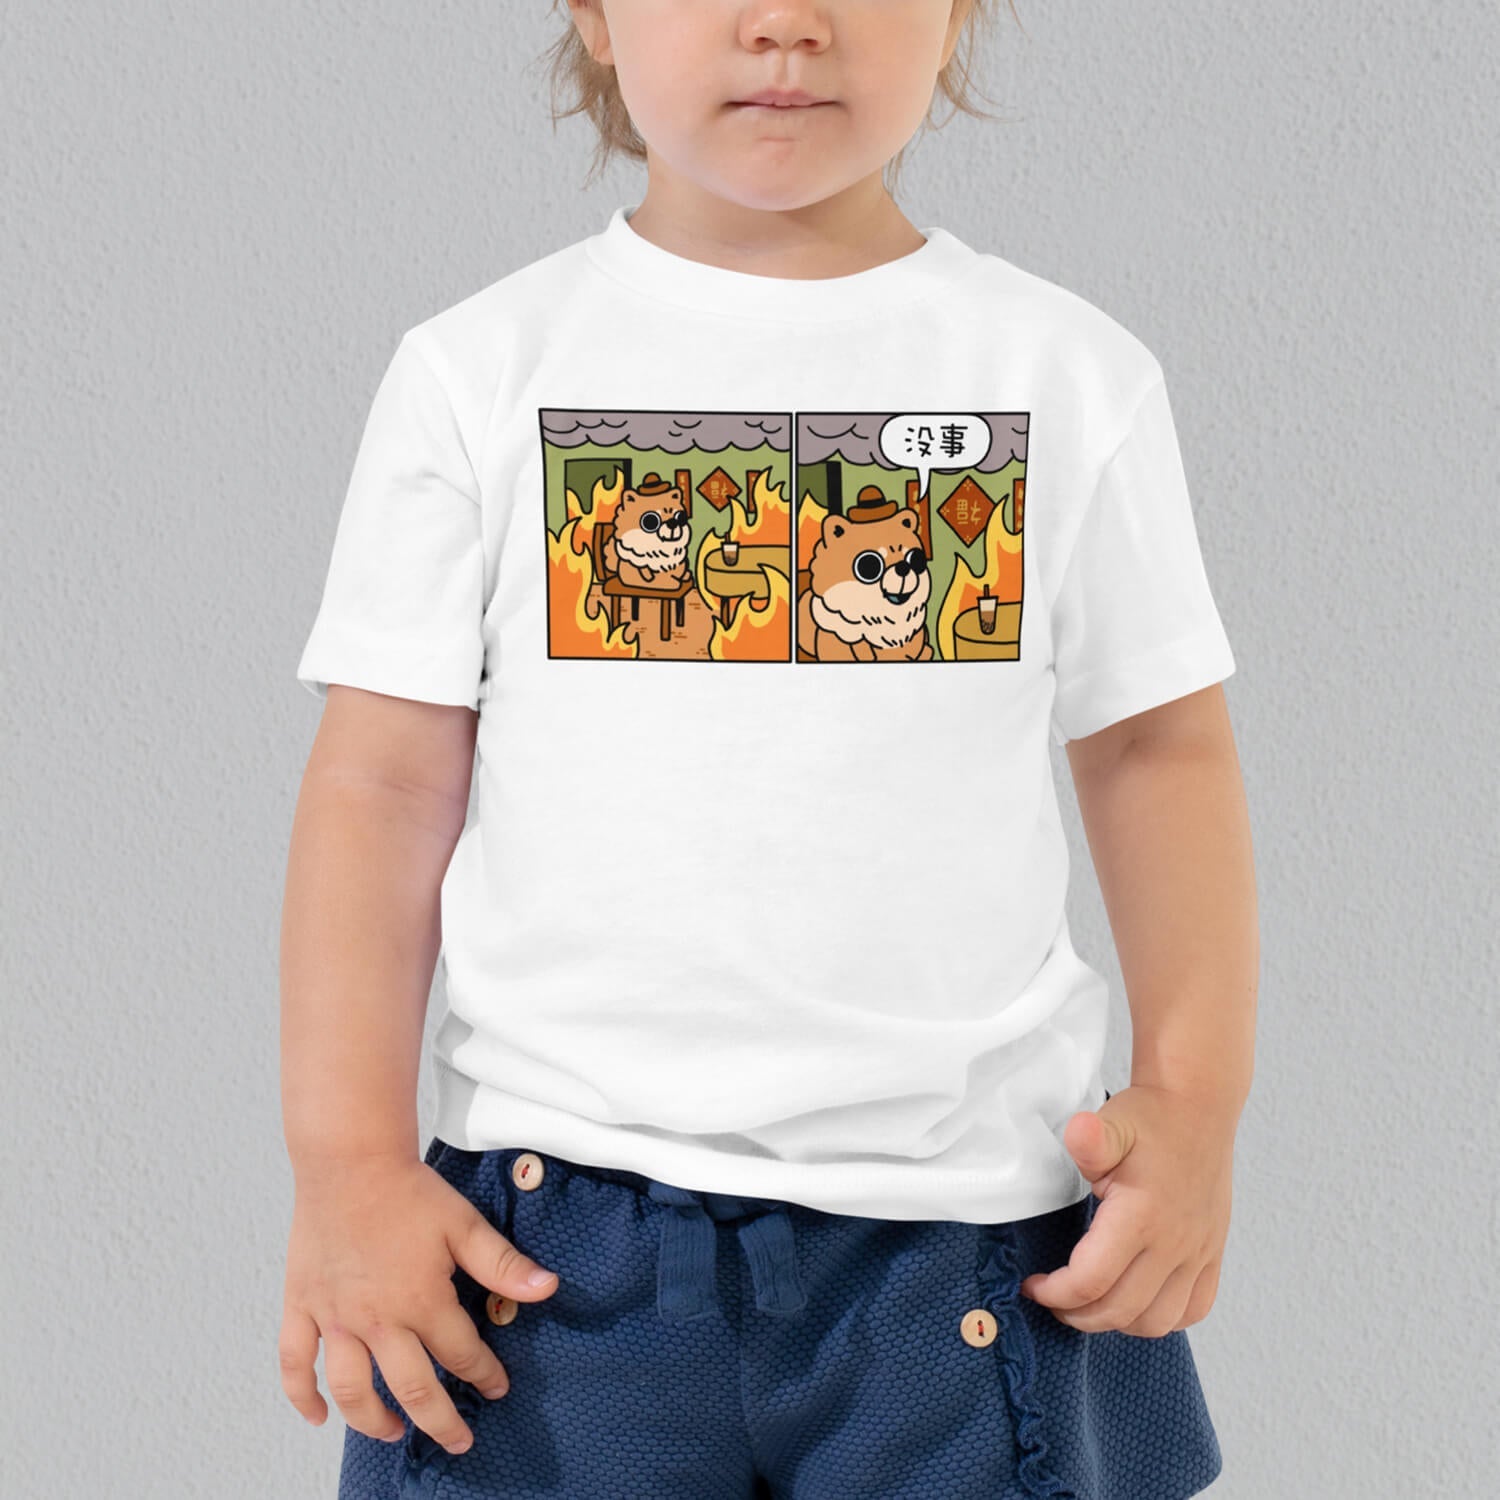 This Is Fine Toddler T-Shirt - Ni De Mama Chinese Clothing